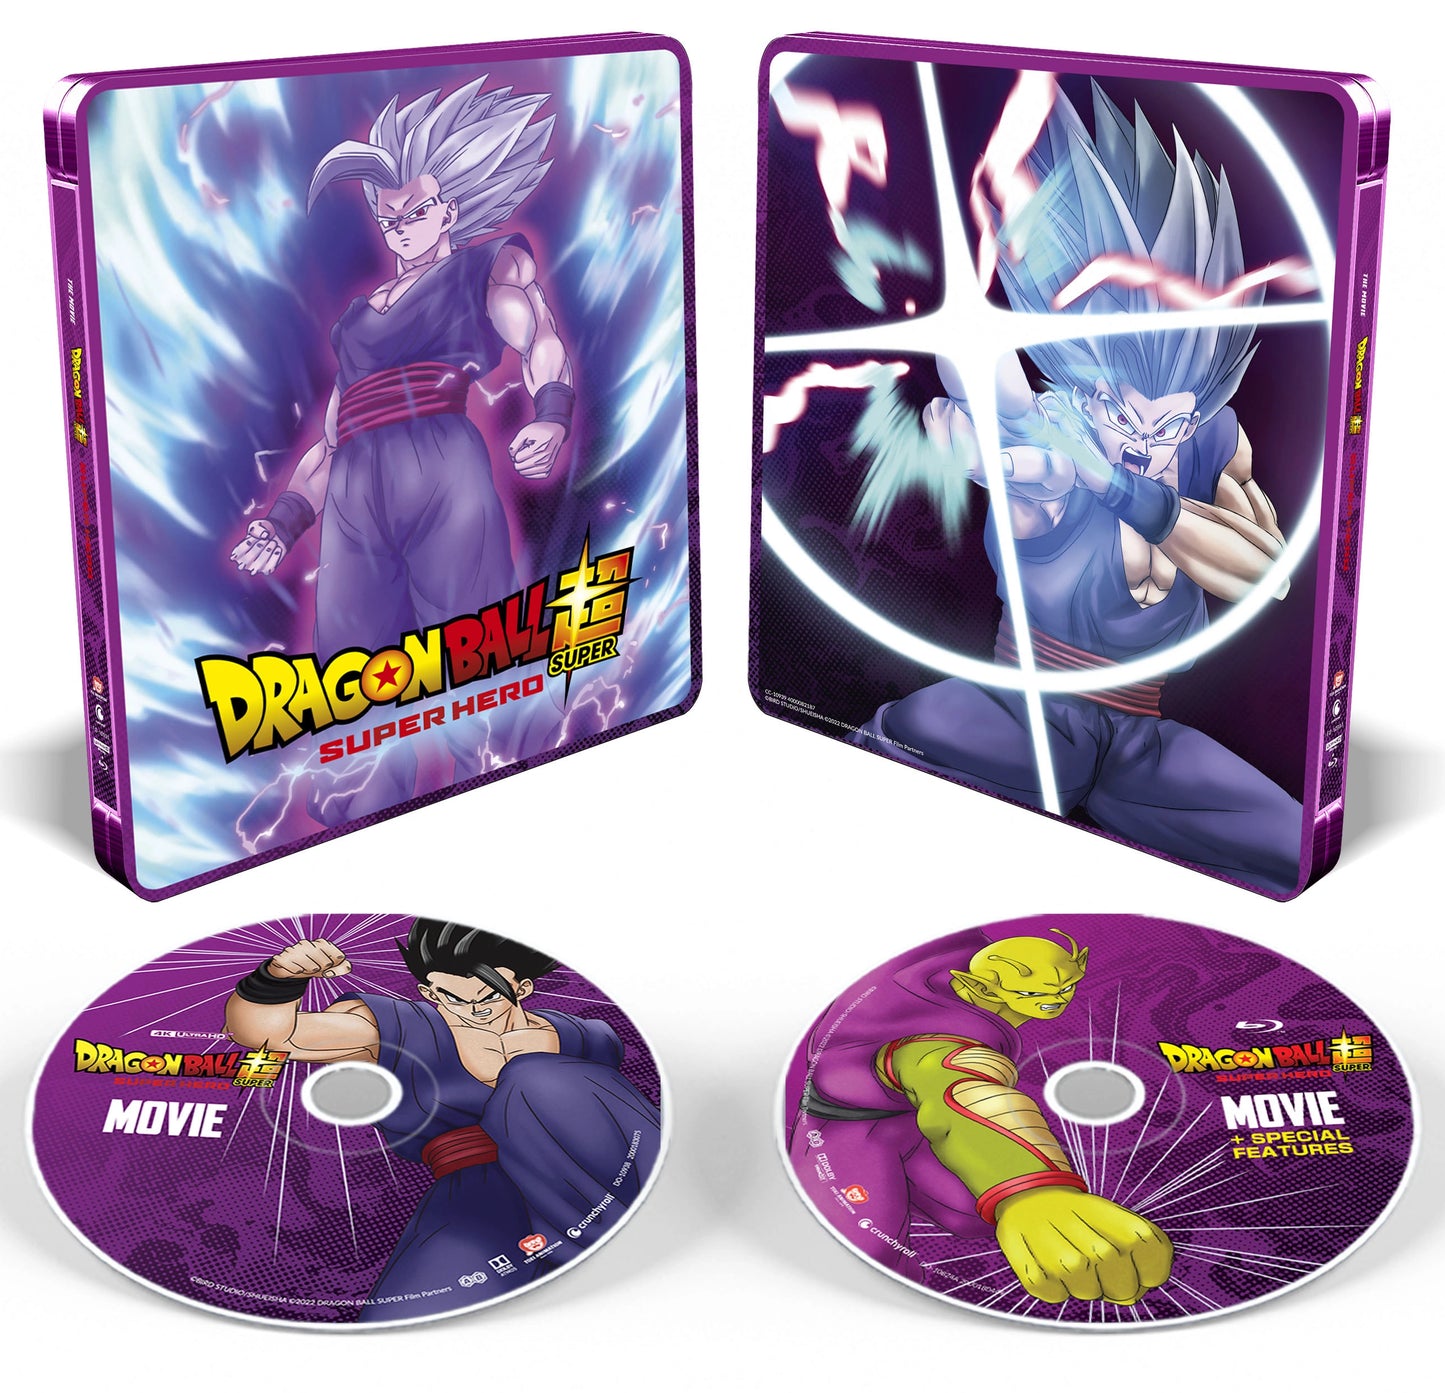 Dragon Ball Super: Super Hero' Sets Blu-Ray and DVD Release Date